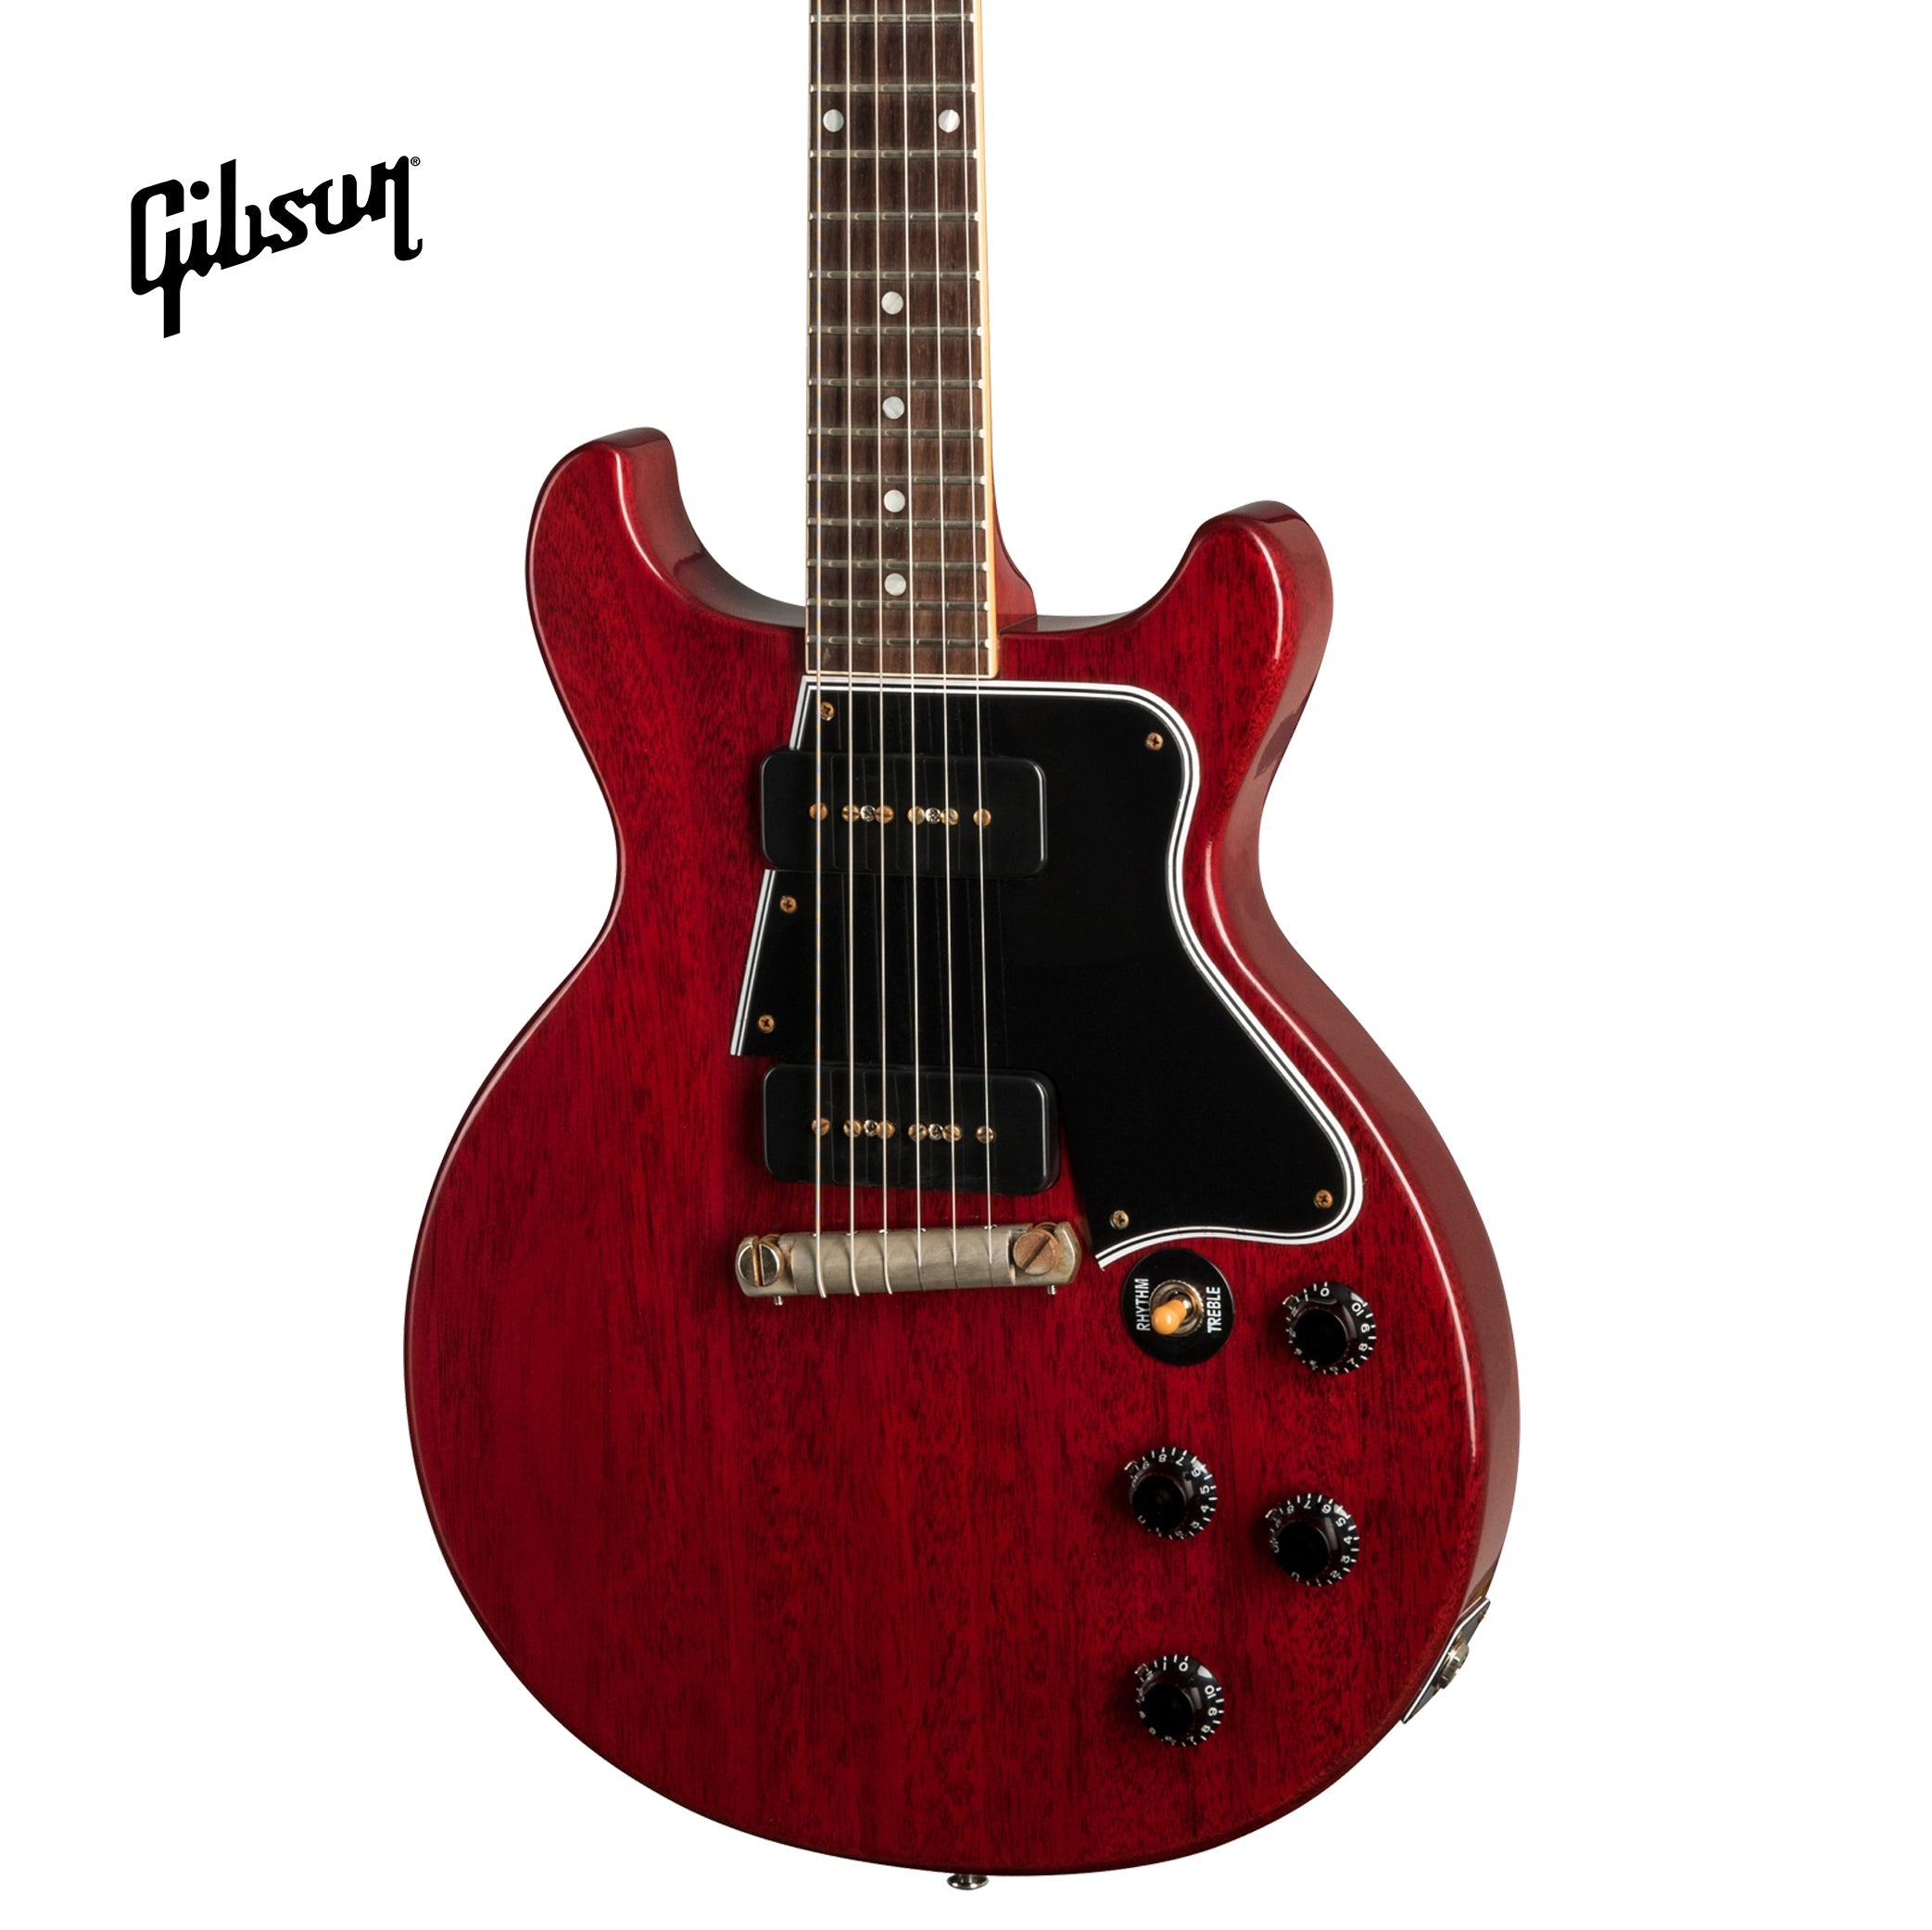 GIBSON 1960 LES PAUL SPECIAL DOUBLE CUT REISSUE VOS ELECTRIC GUITAR - CHERRY RED